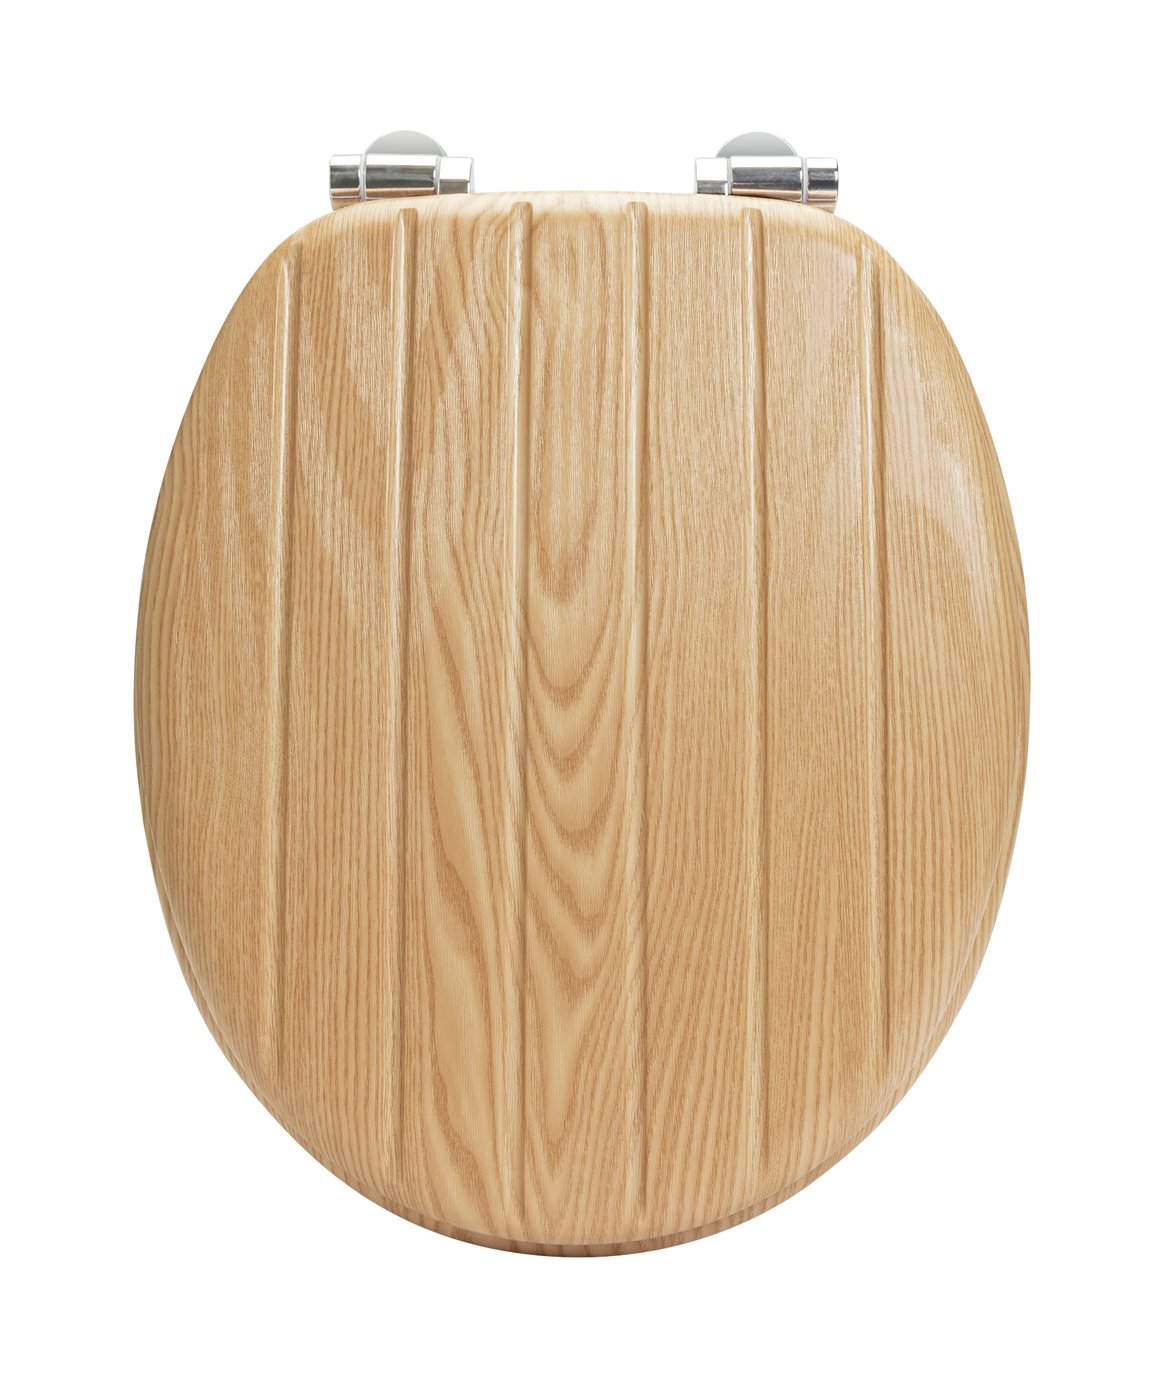 Argos Home Natural Tongue And Groove Toilet Seat